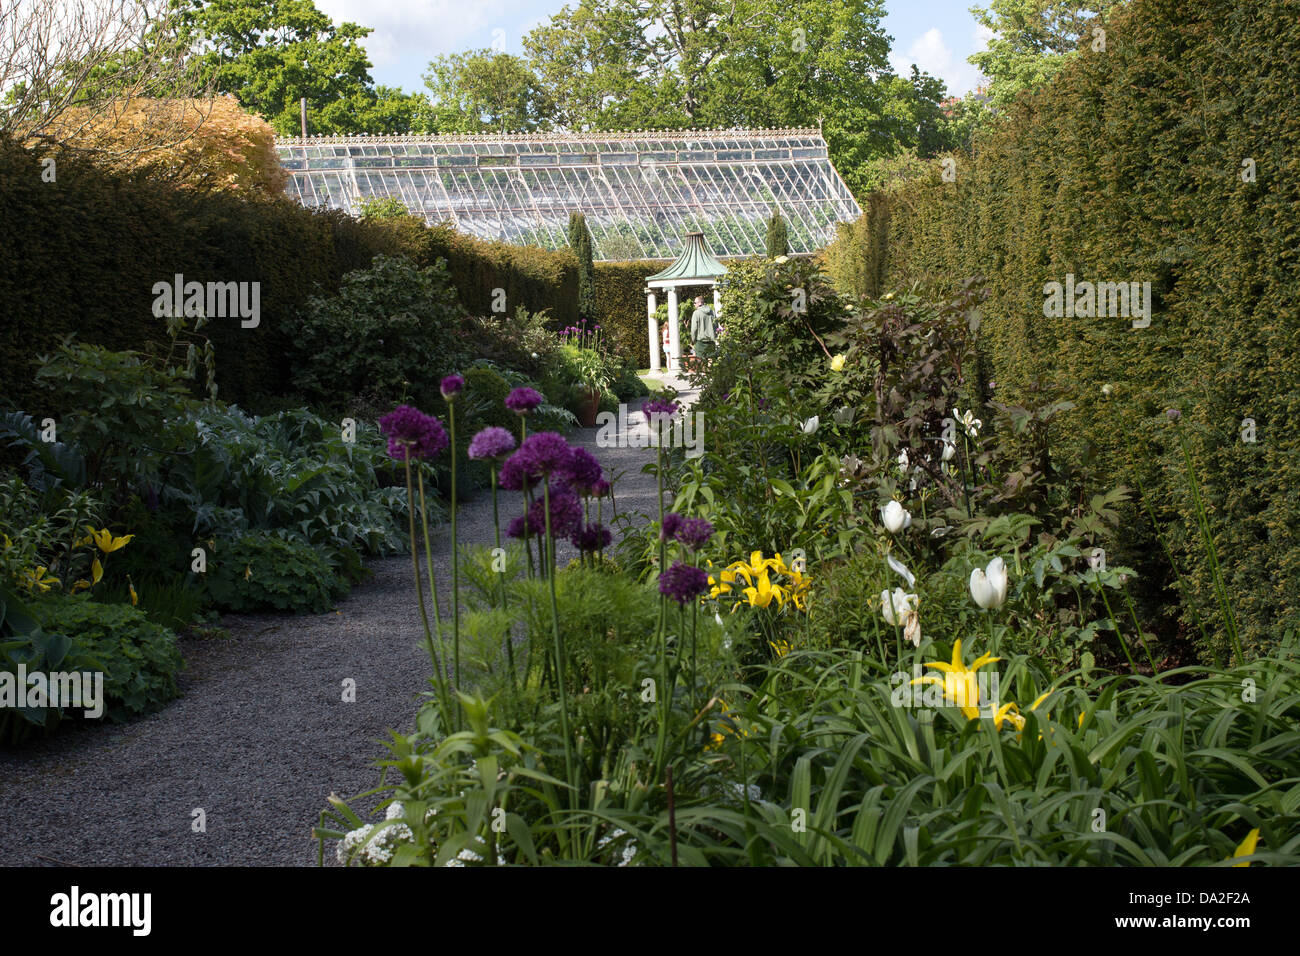 Pathway in the garden, with a green house in the background. Stock Photo